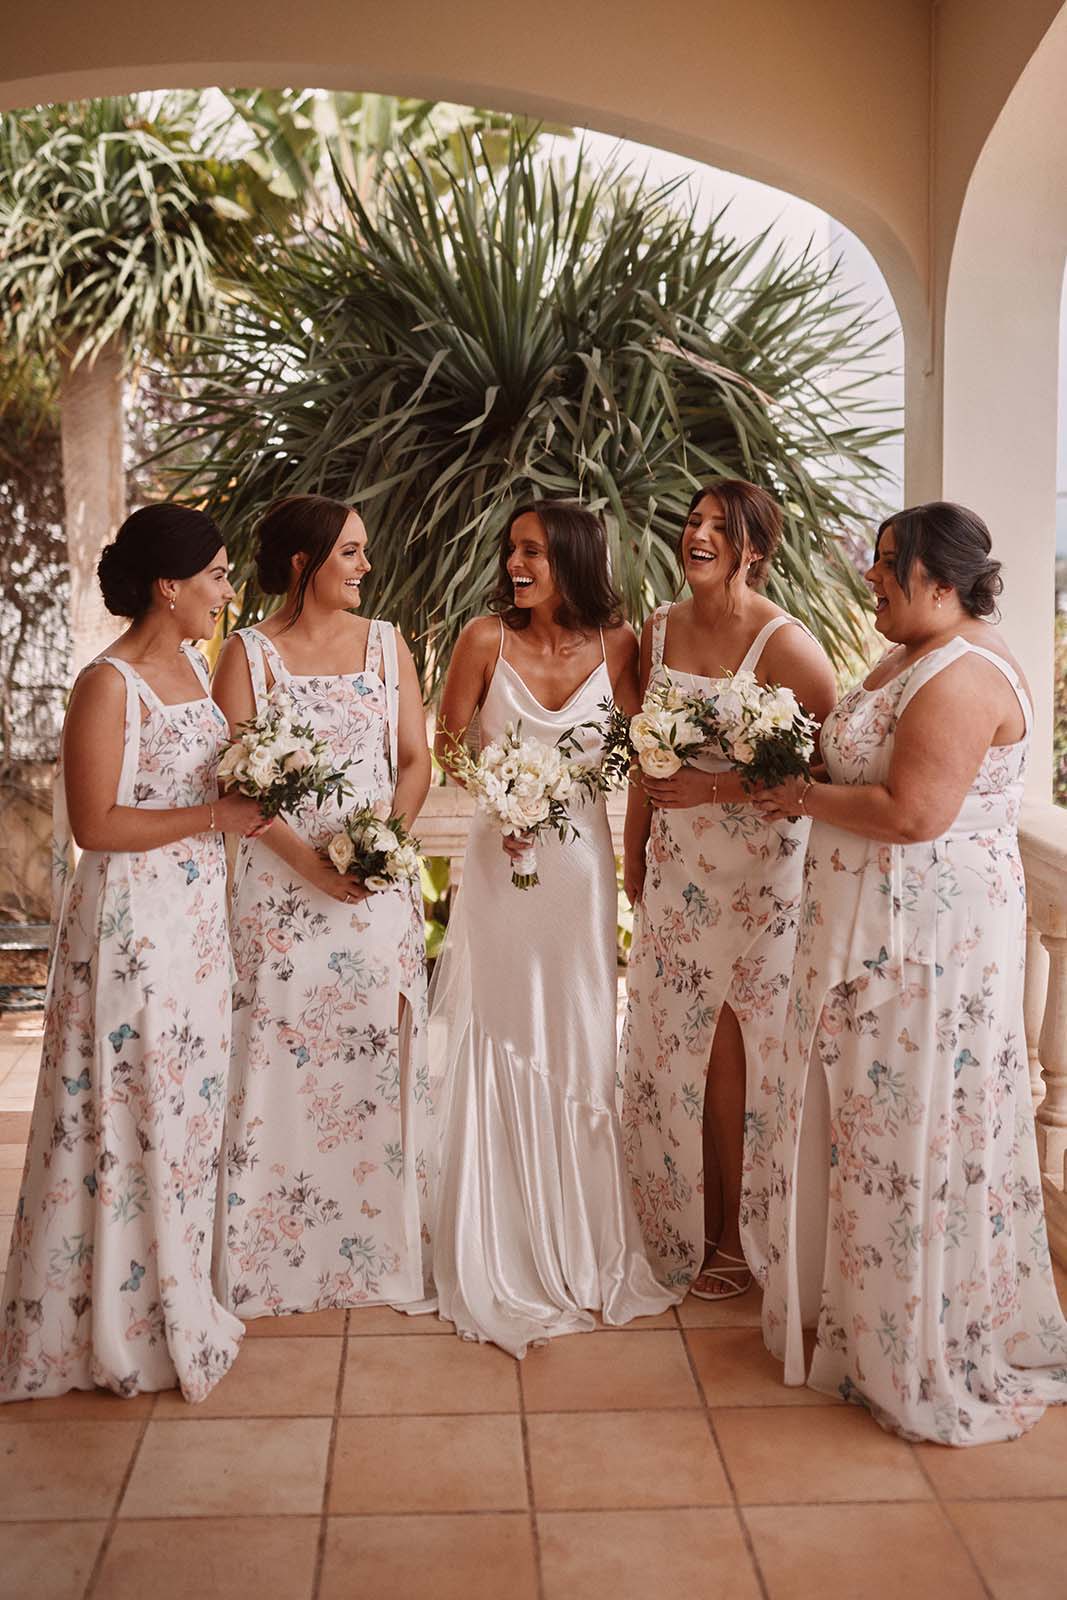 Bride, laughing with her bridesmaids, all wearing the same dress